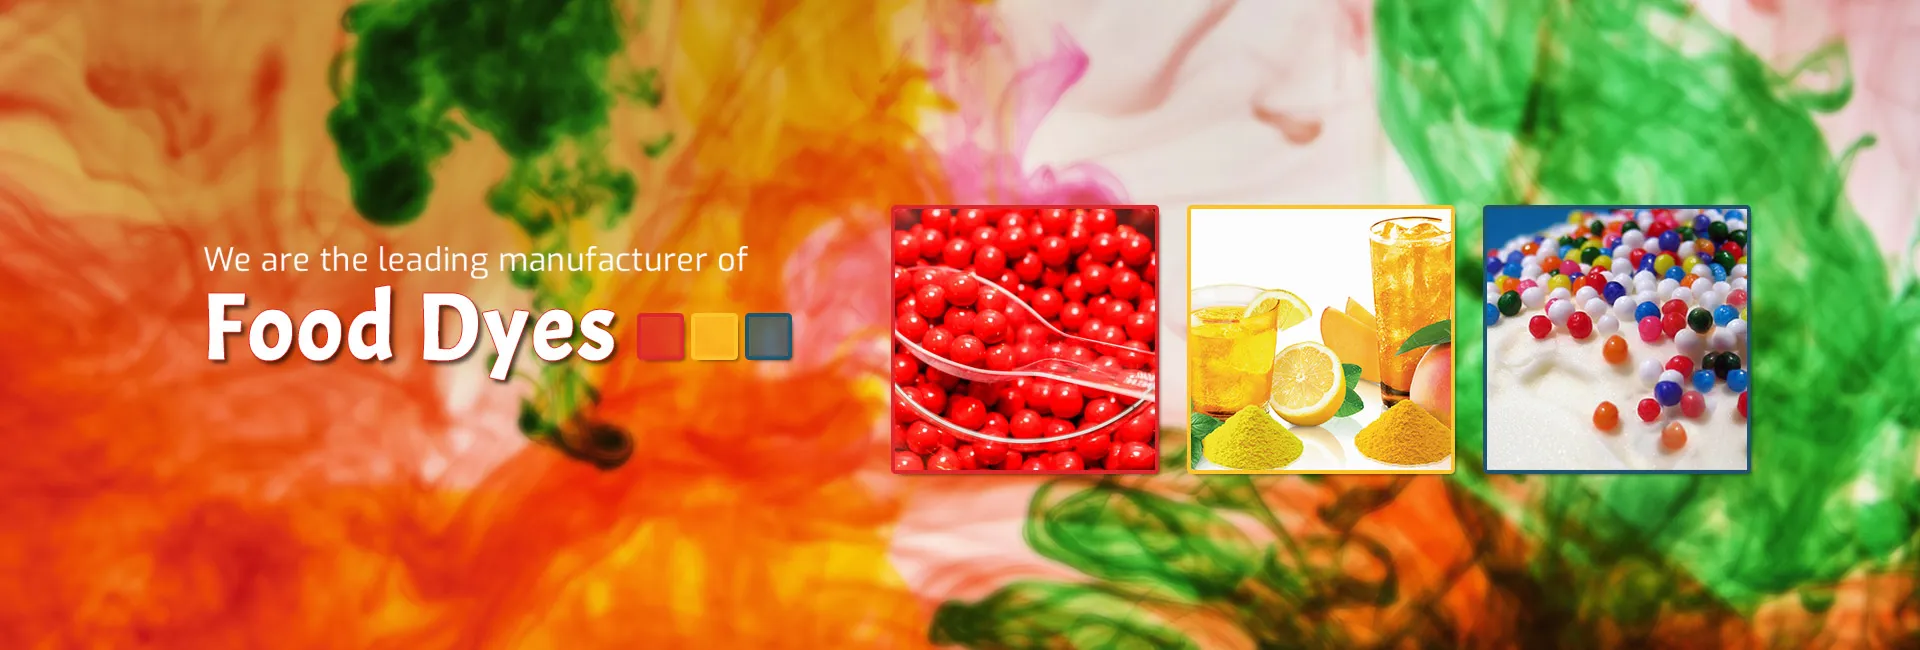 Food Dyes Manufacturer & Suppliers in Turkey